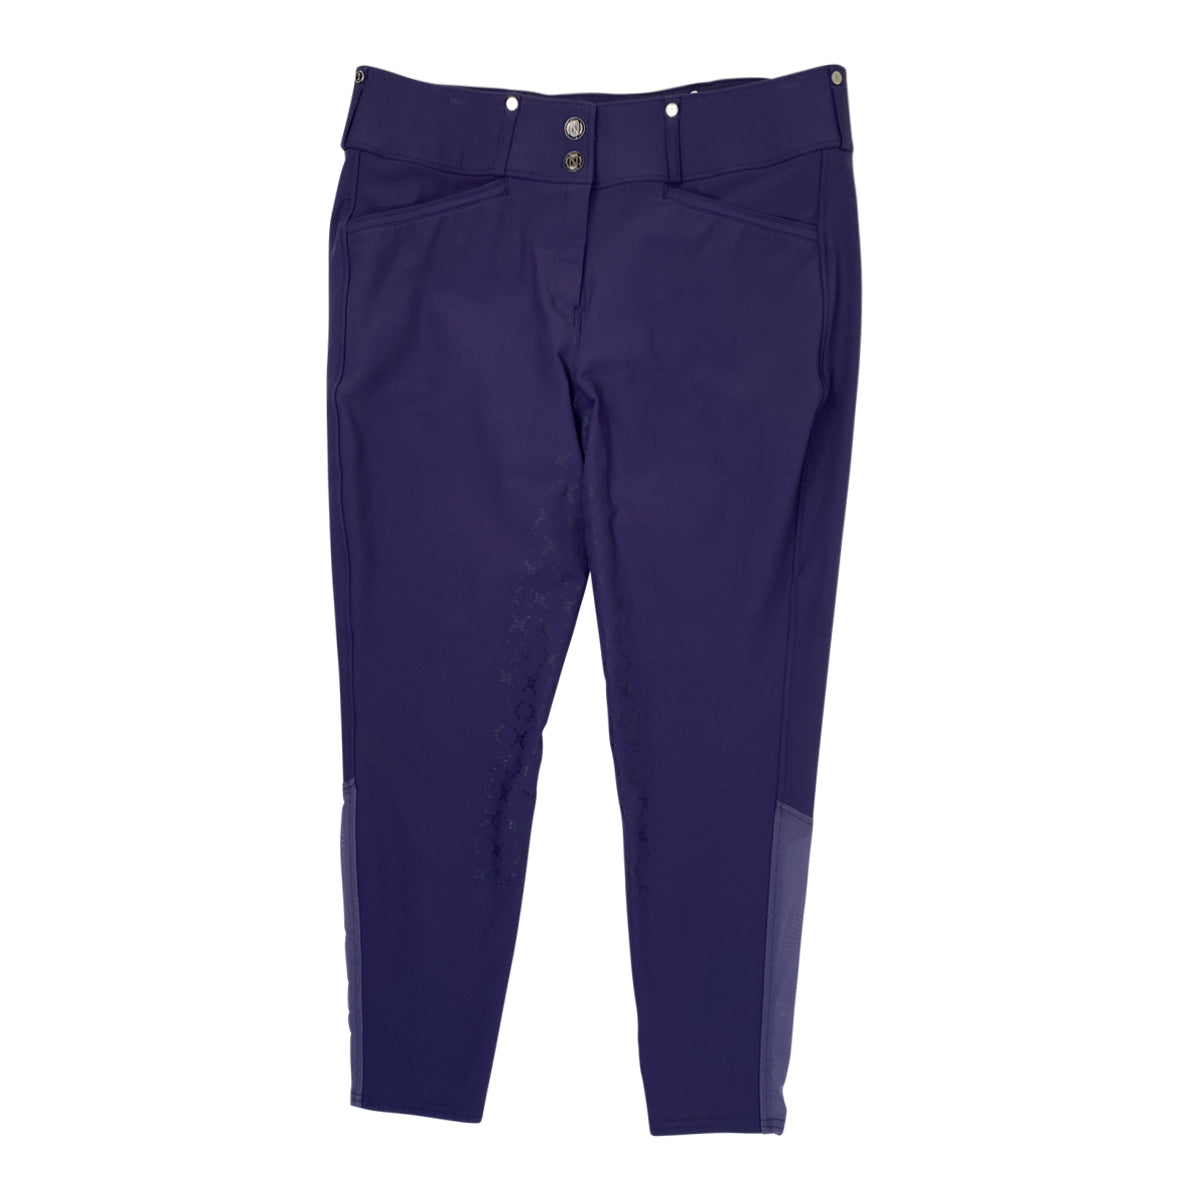 Tredstep Symphony "Evolute" Breeches in Concord